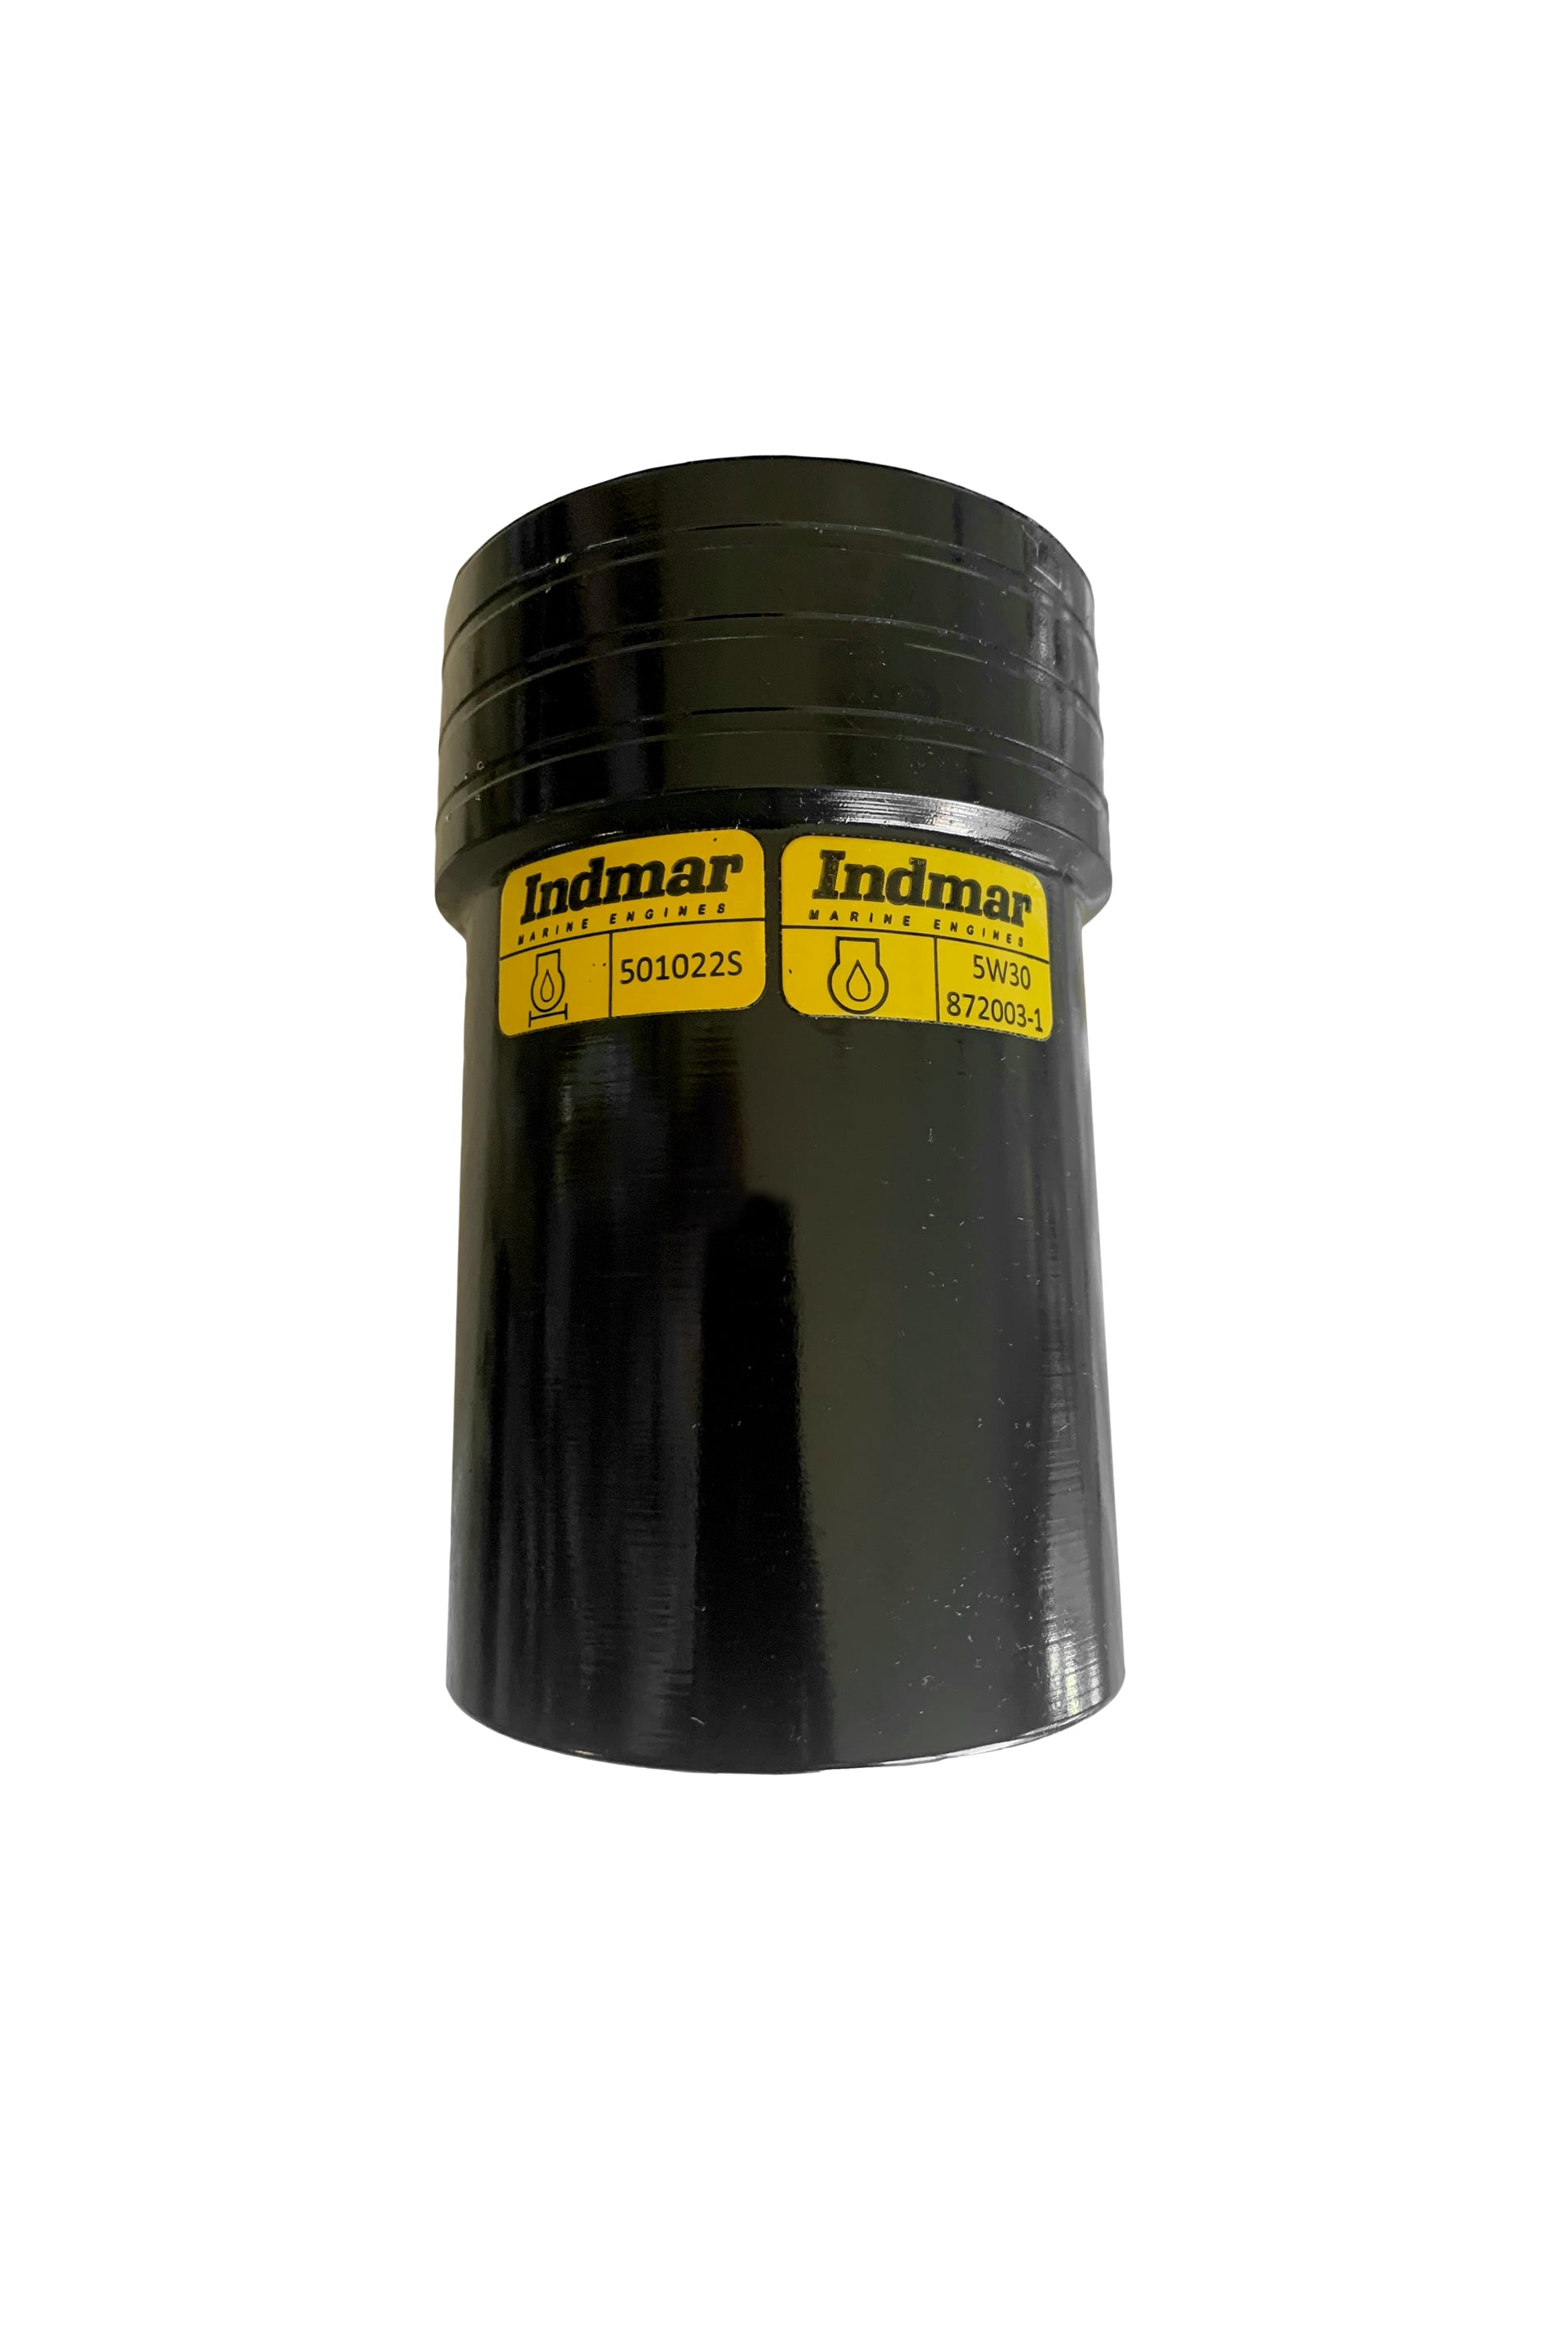 Canister for Oil Filter Cartridge - 6.2 Indmar/Ford